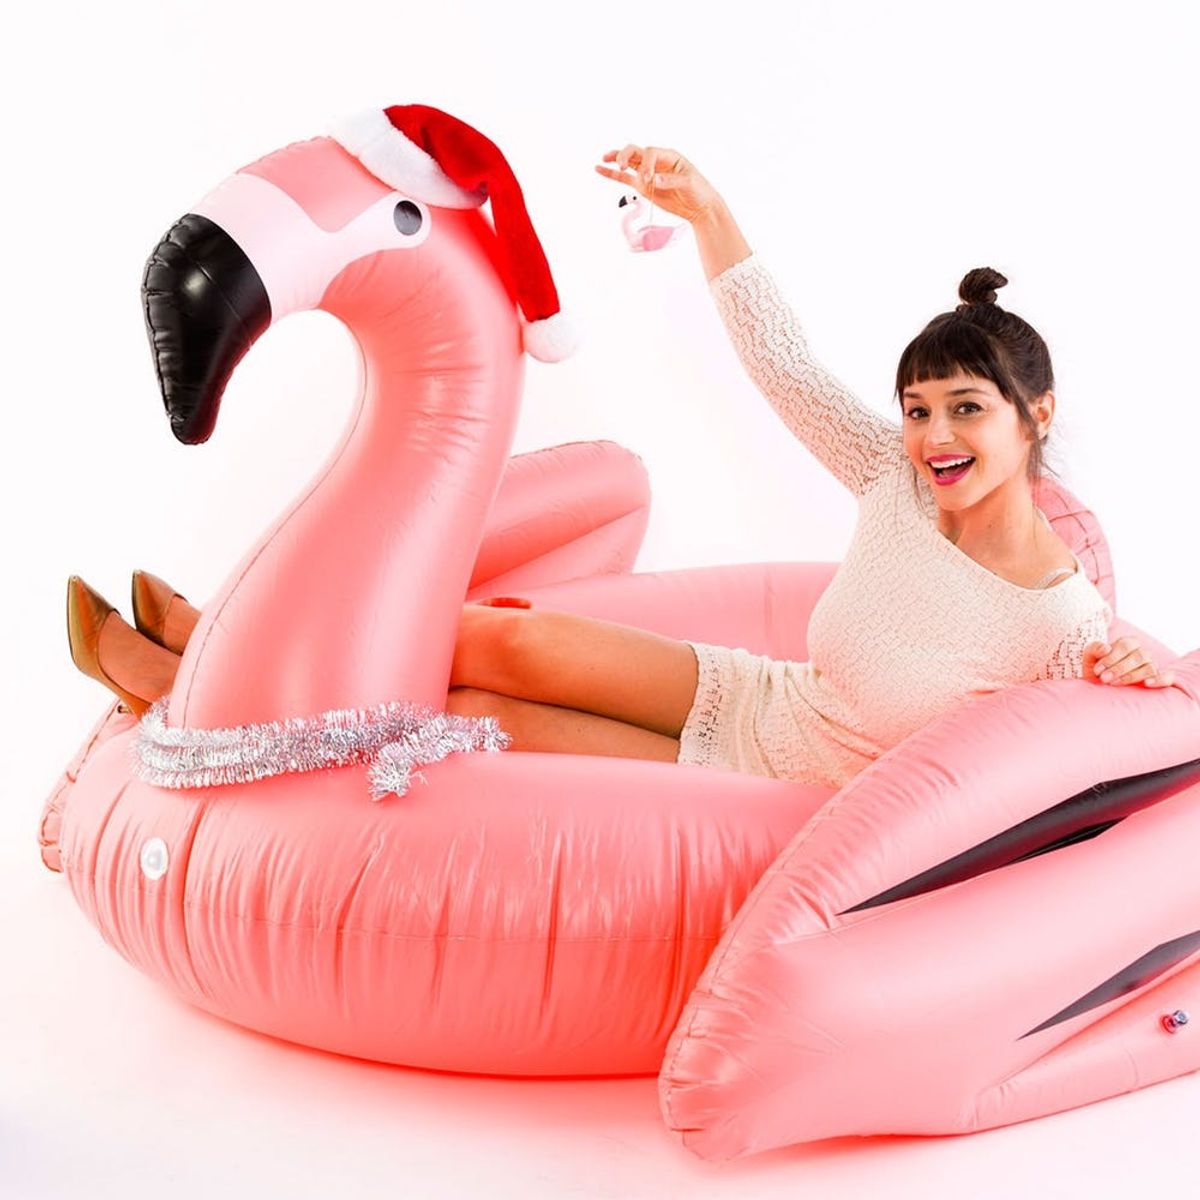 DIY These Flamingo Pool Float Ornaments for an Instagram-Worthy Tree